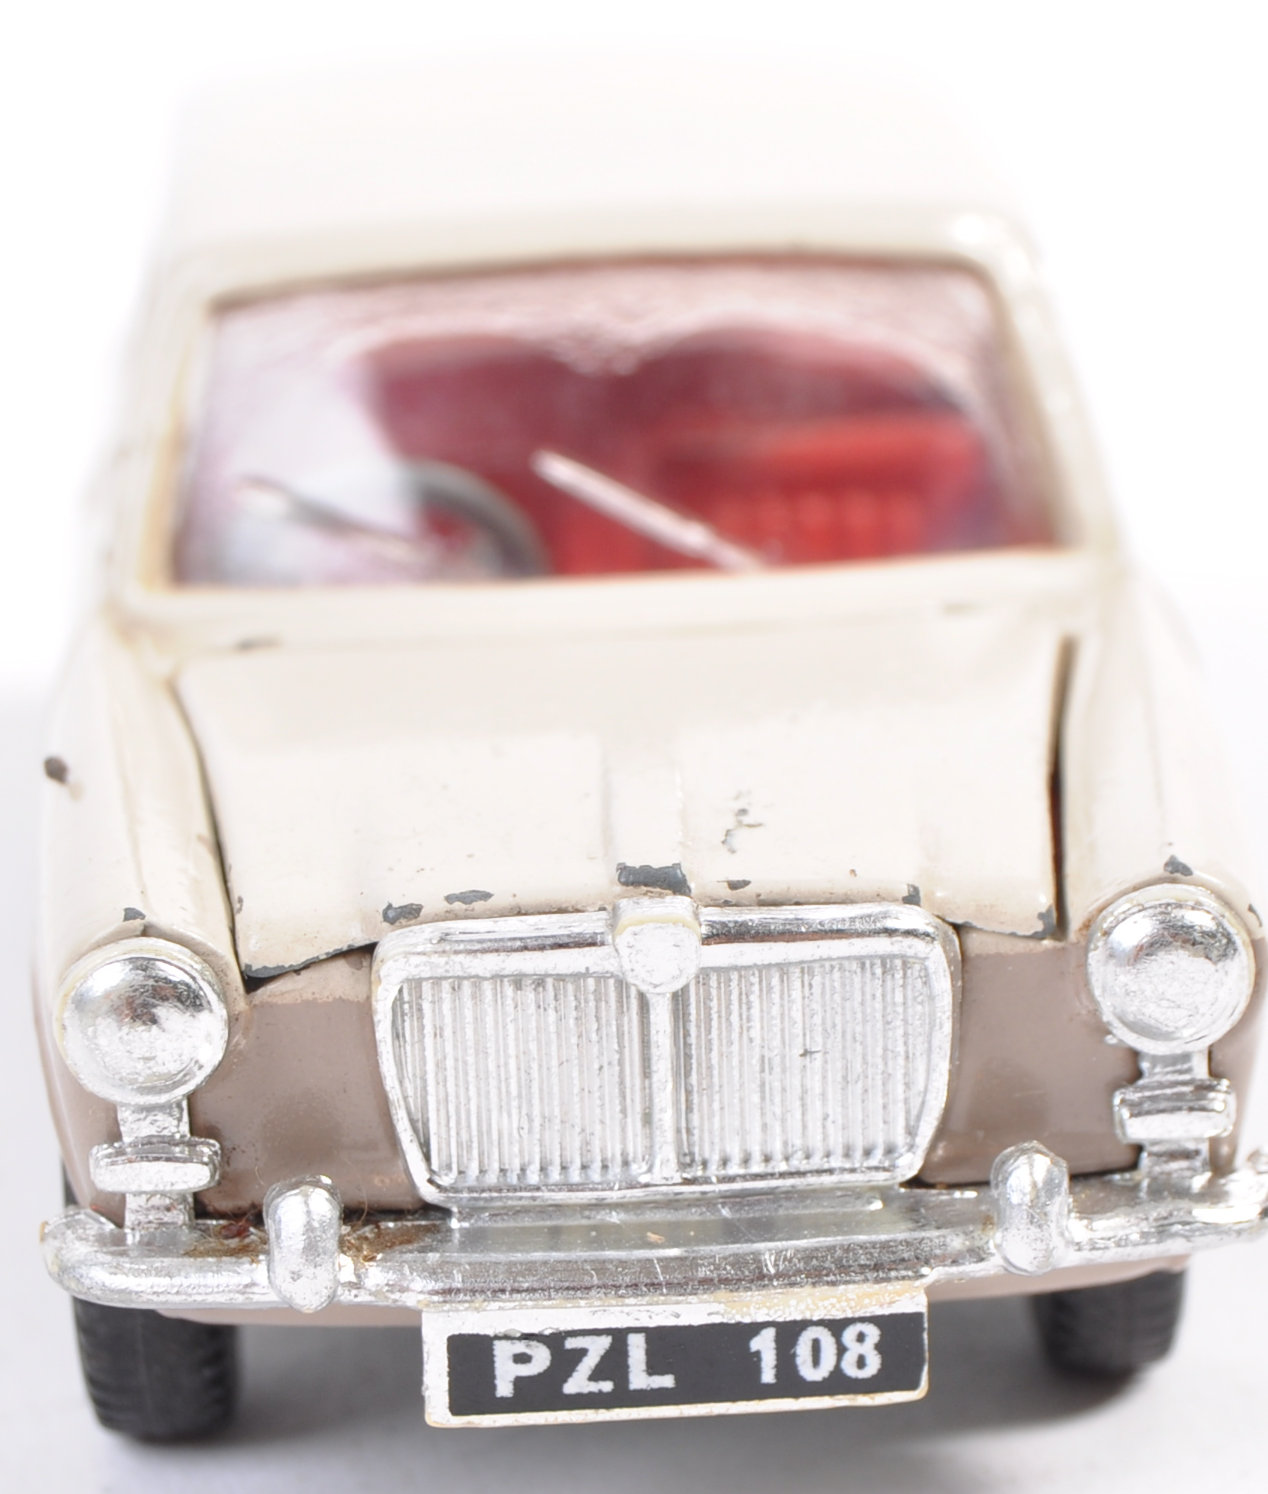 SPOT-ON TRI-ANG 1/42 SCALE MODEL MG CAR - Image 4 of 5